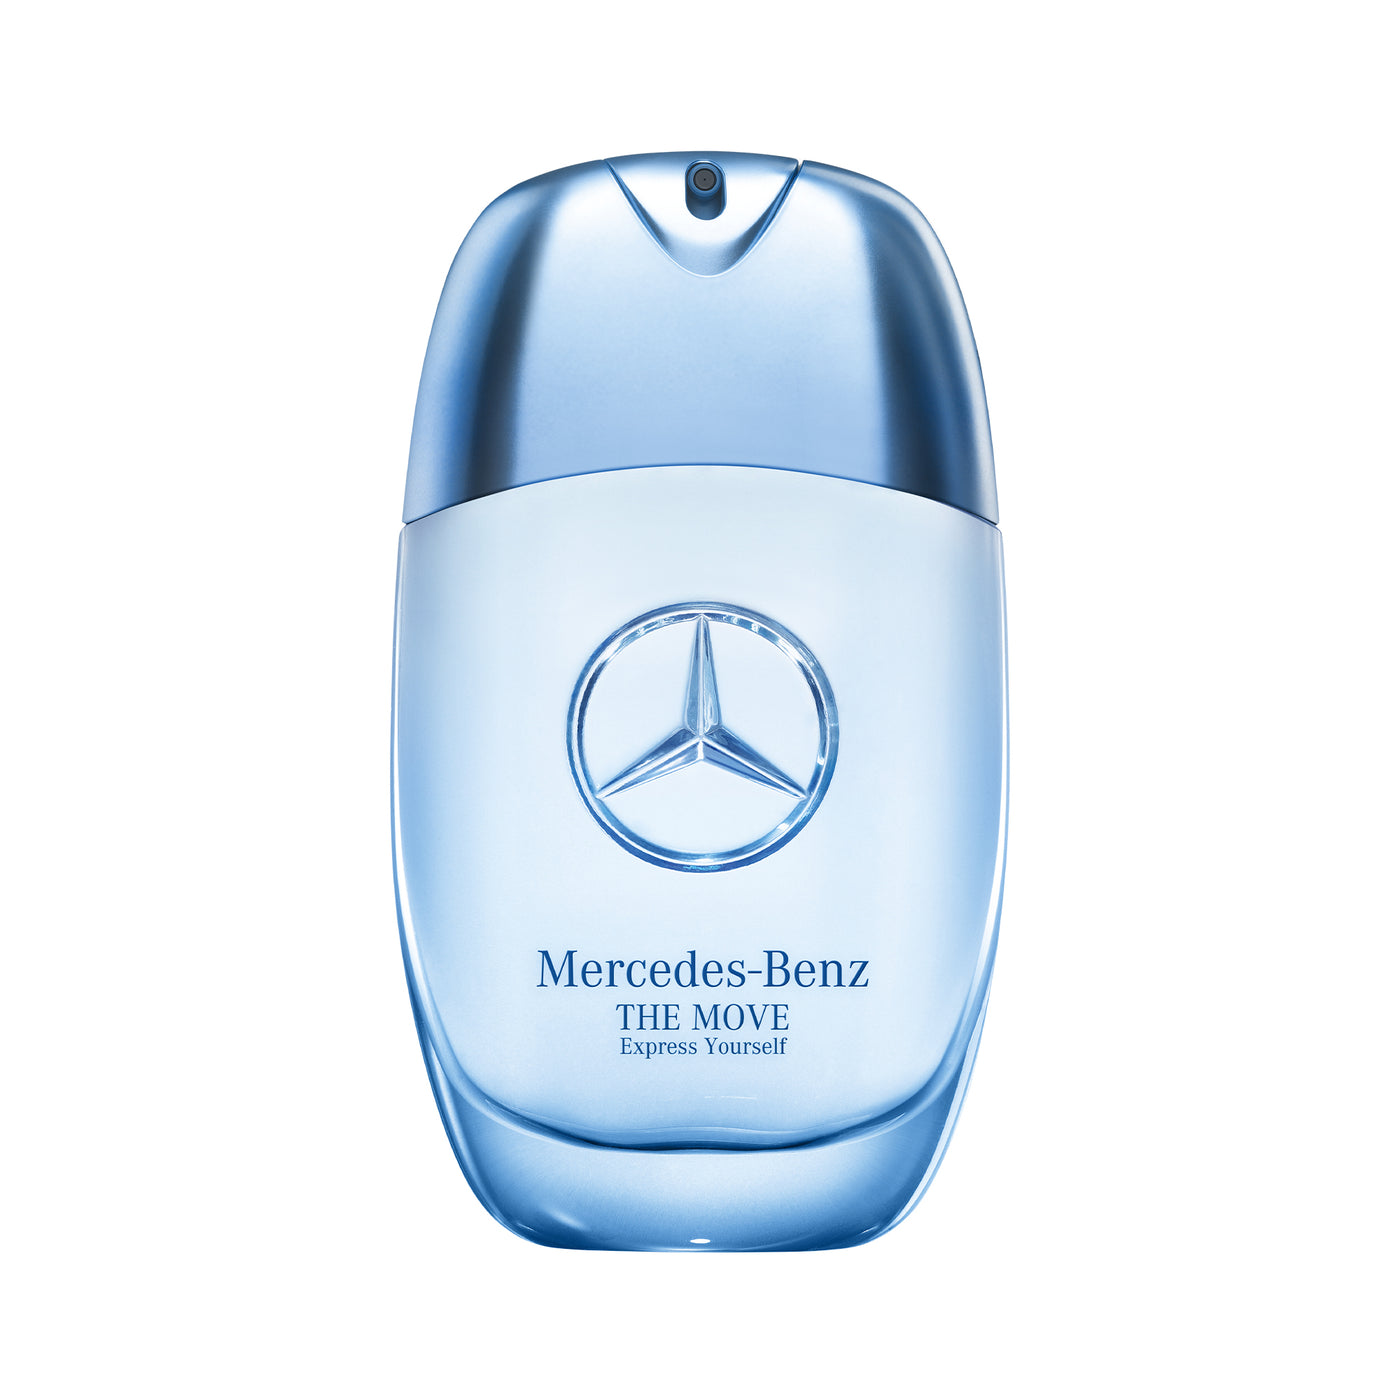 Mercedes-Benz THE MOVE Express Yourself EDT 100ml